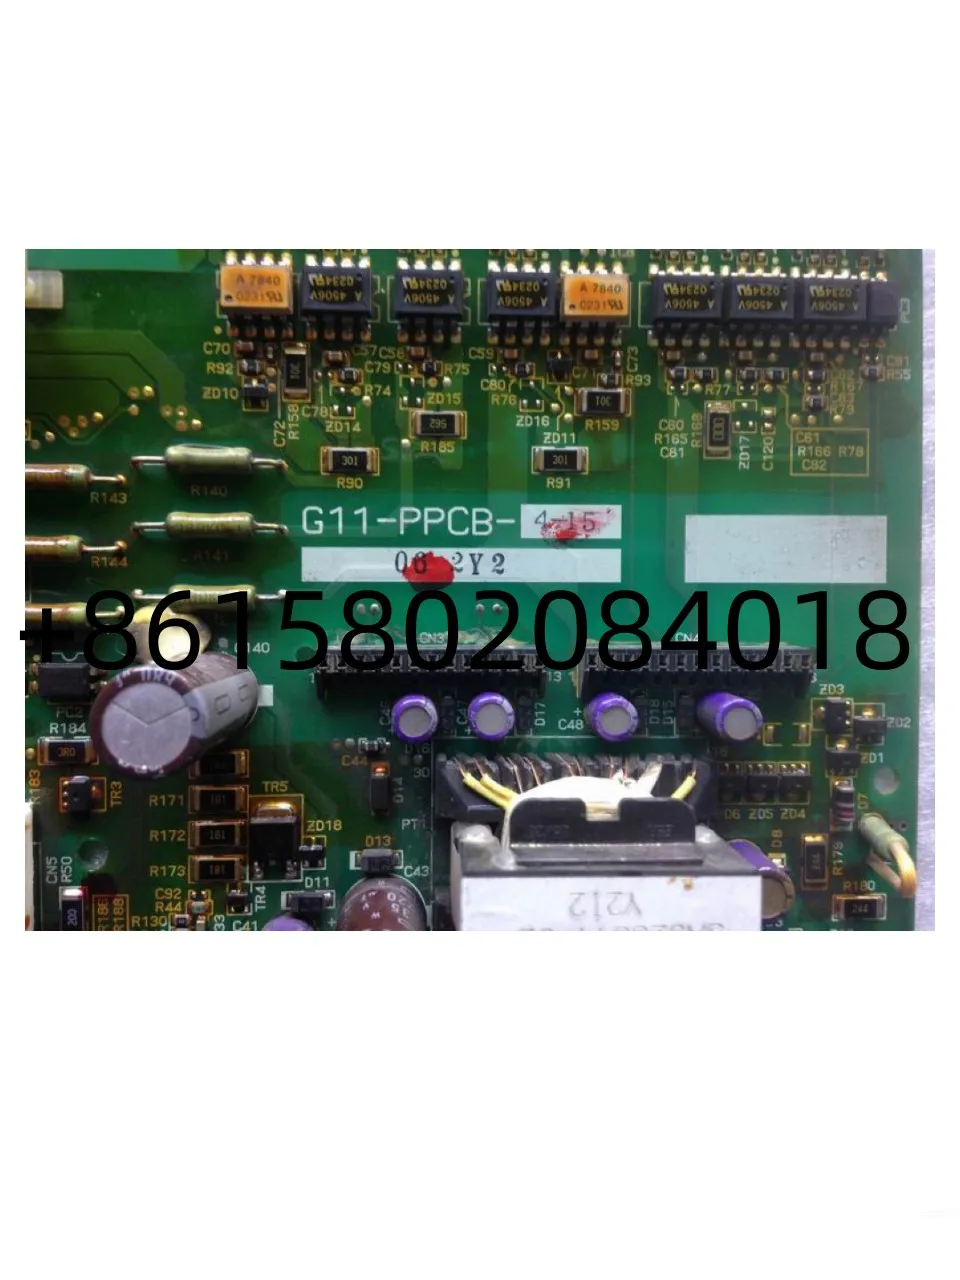 

In Stock INVERTER DRIVER BOARD G11-PPCB-4-15 GOOD IN CONDITION